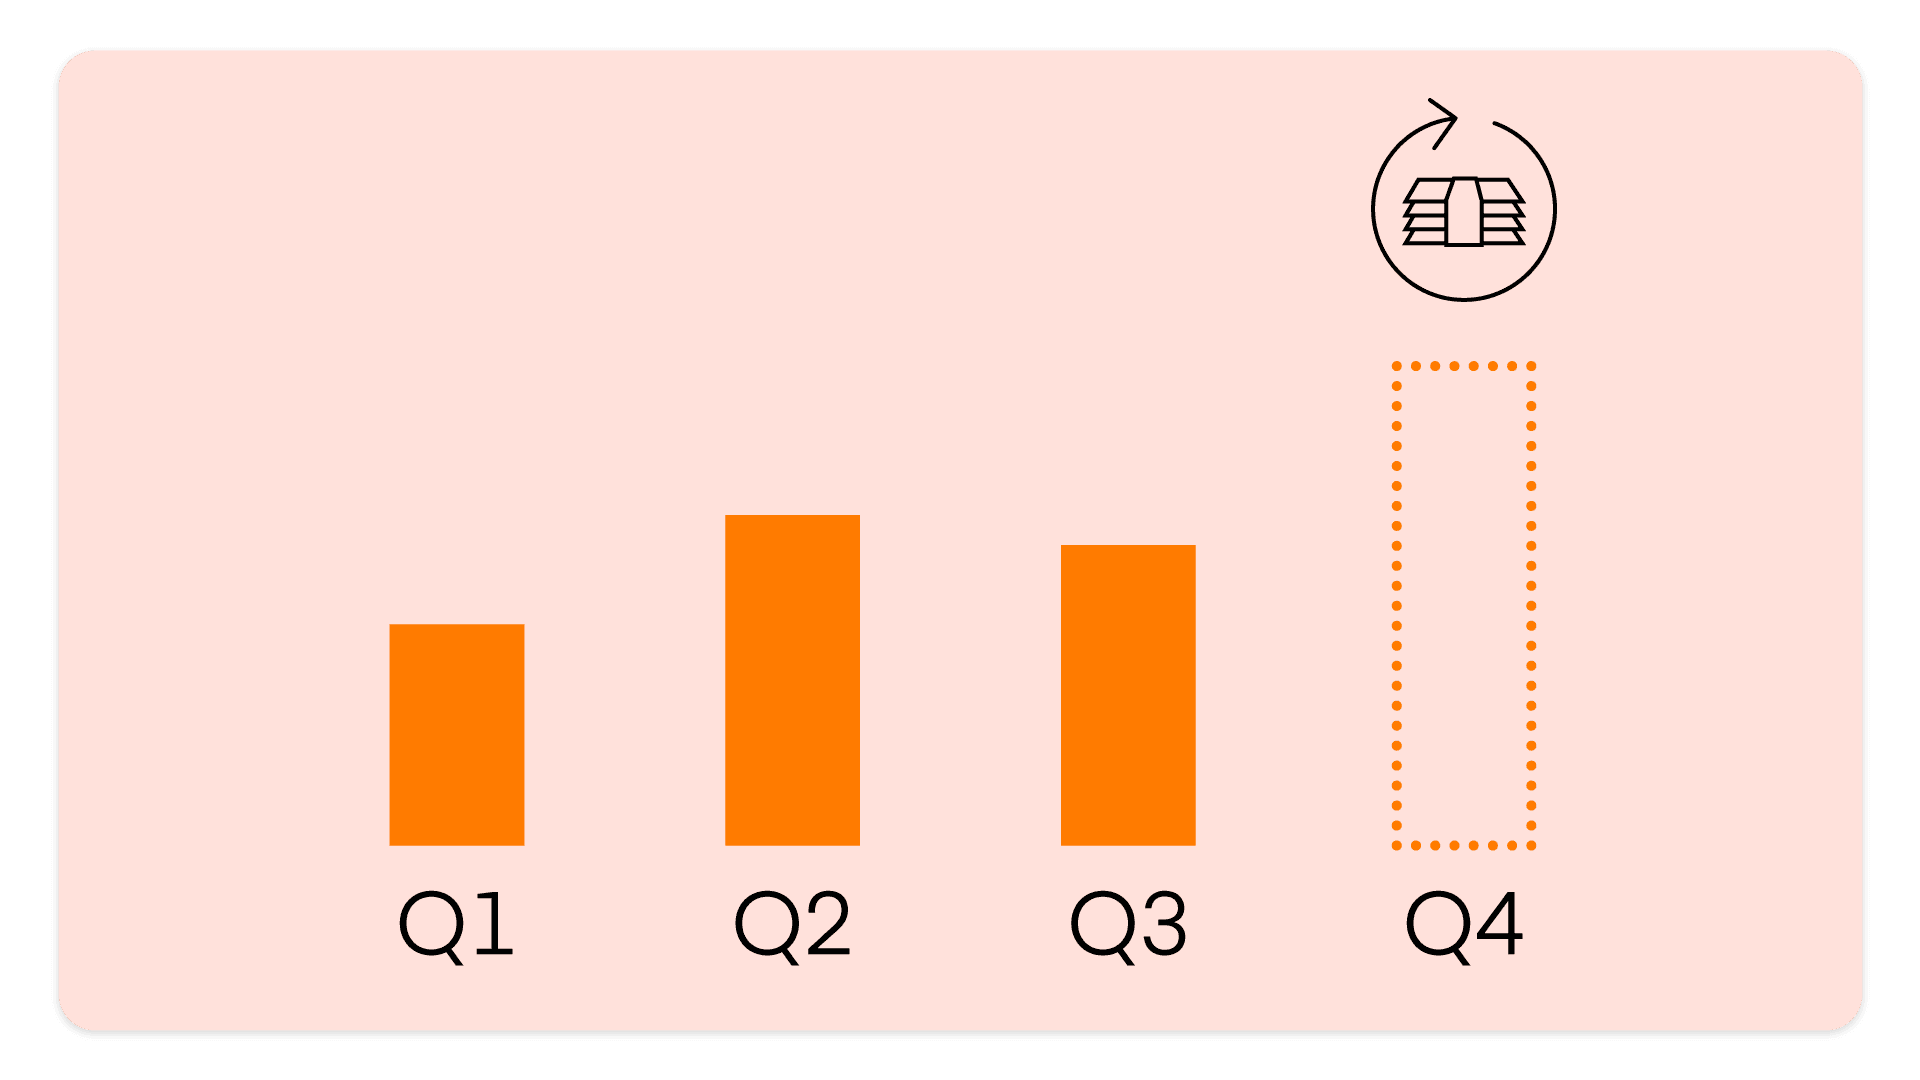 Orange graphic showing a bar chart with Q1, Q2, Q3, and Q4